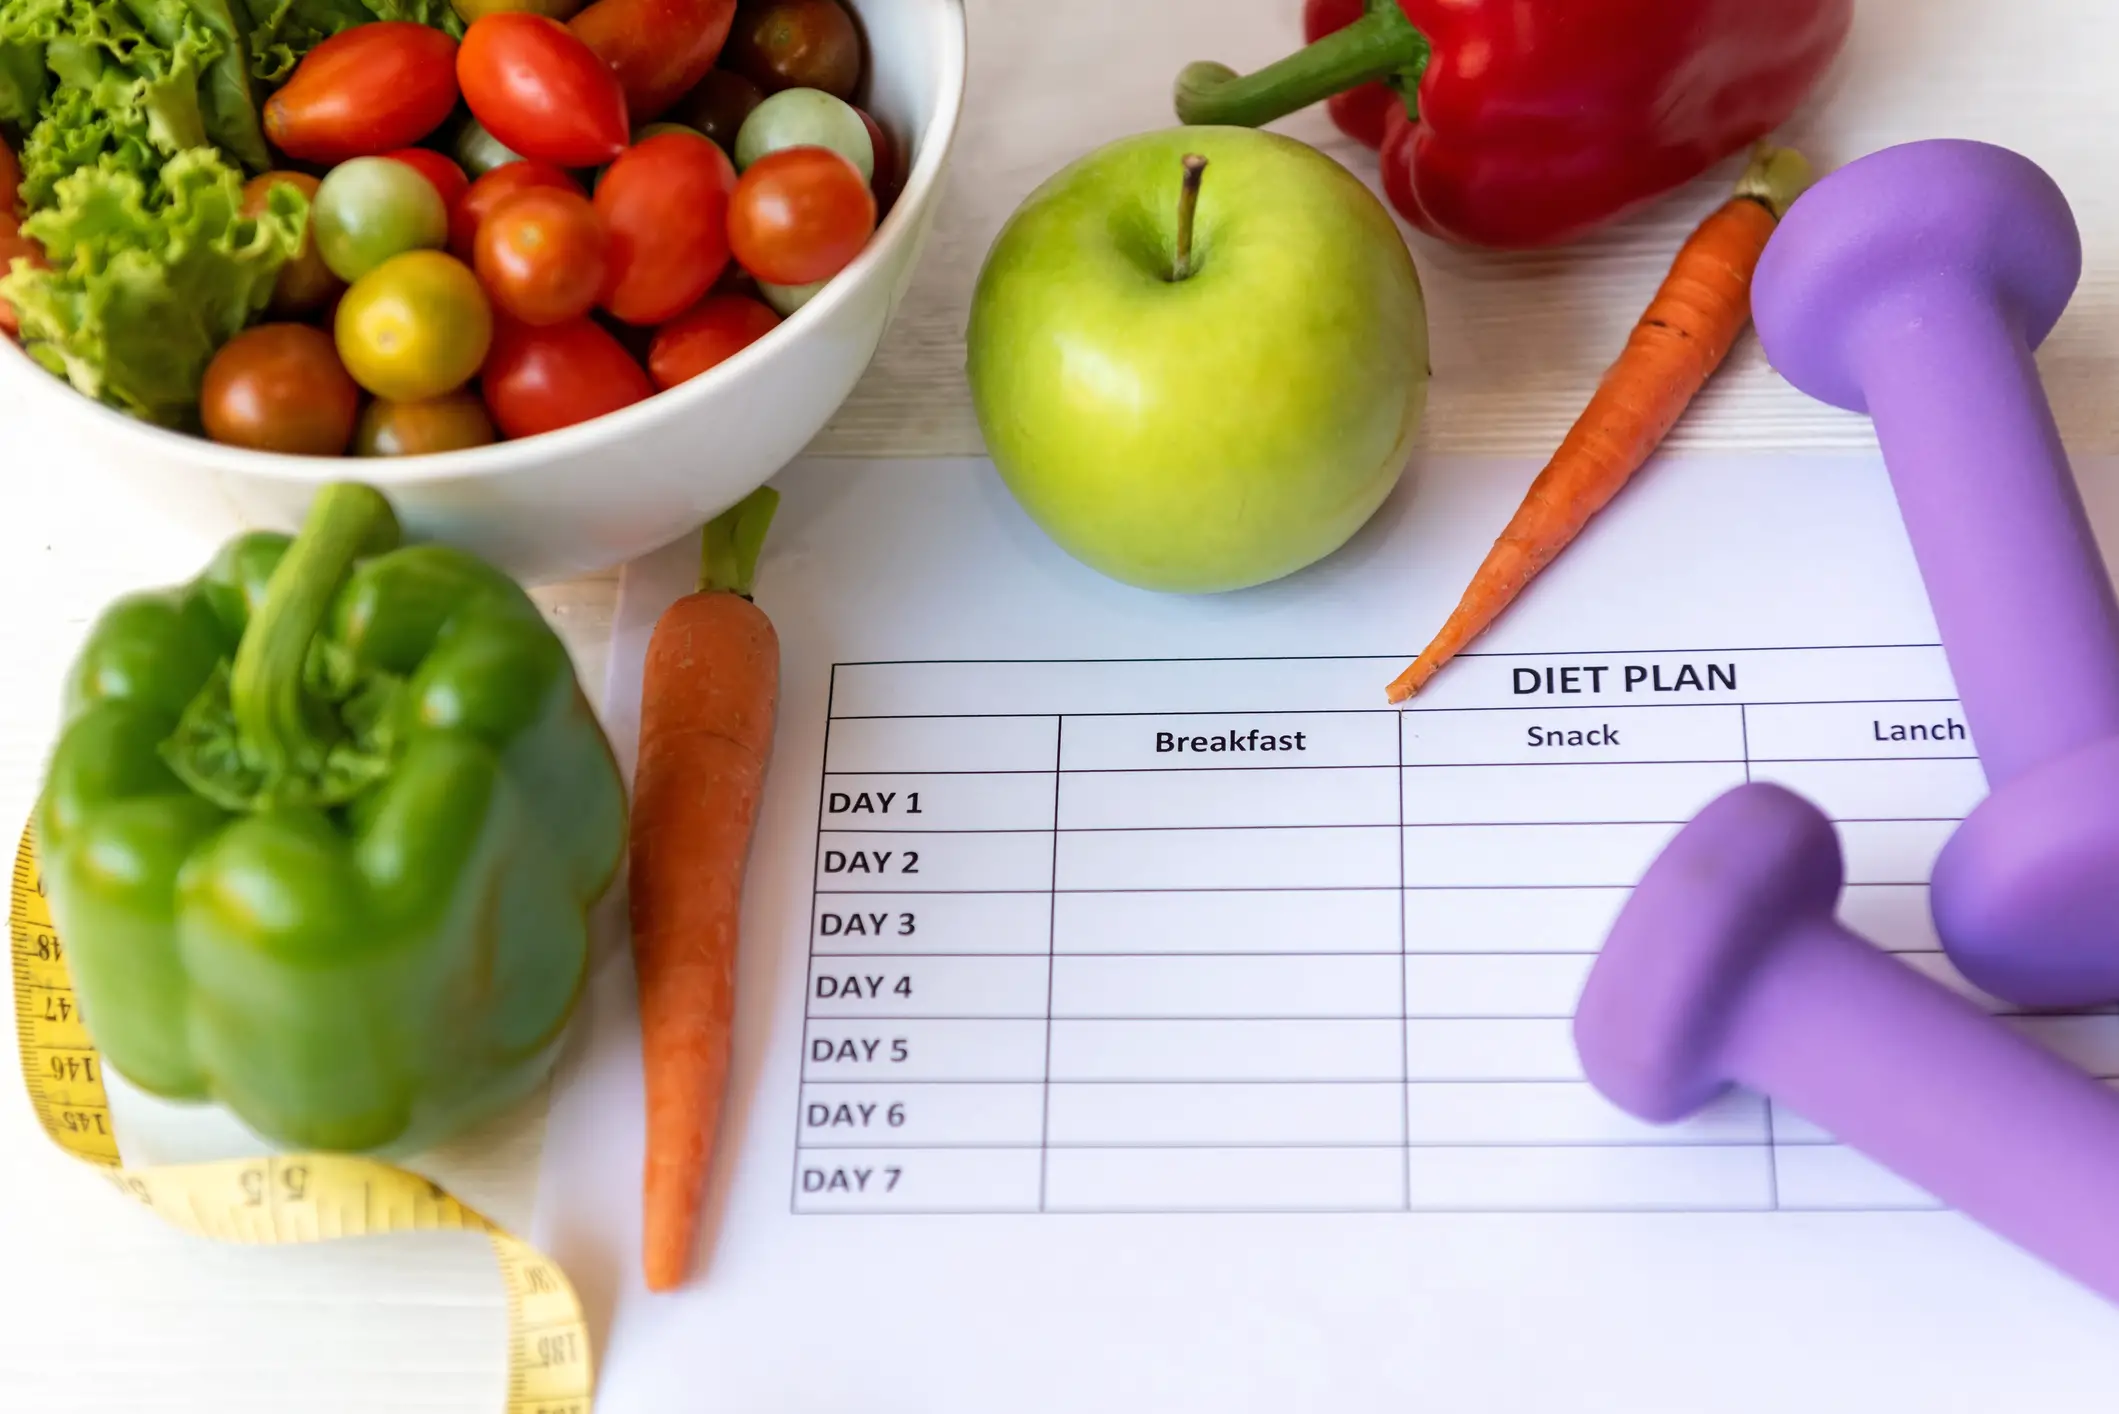 Creating a healthy diet food plan to acquire your six pack abs